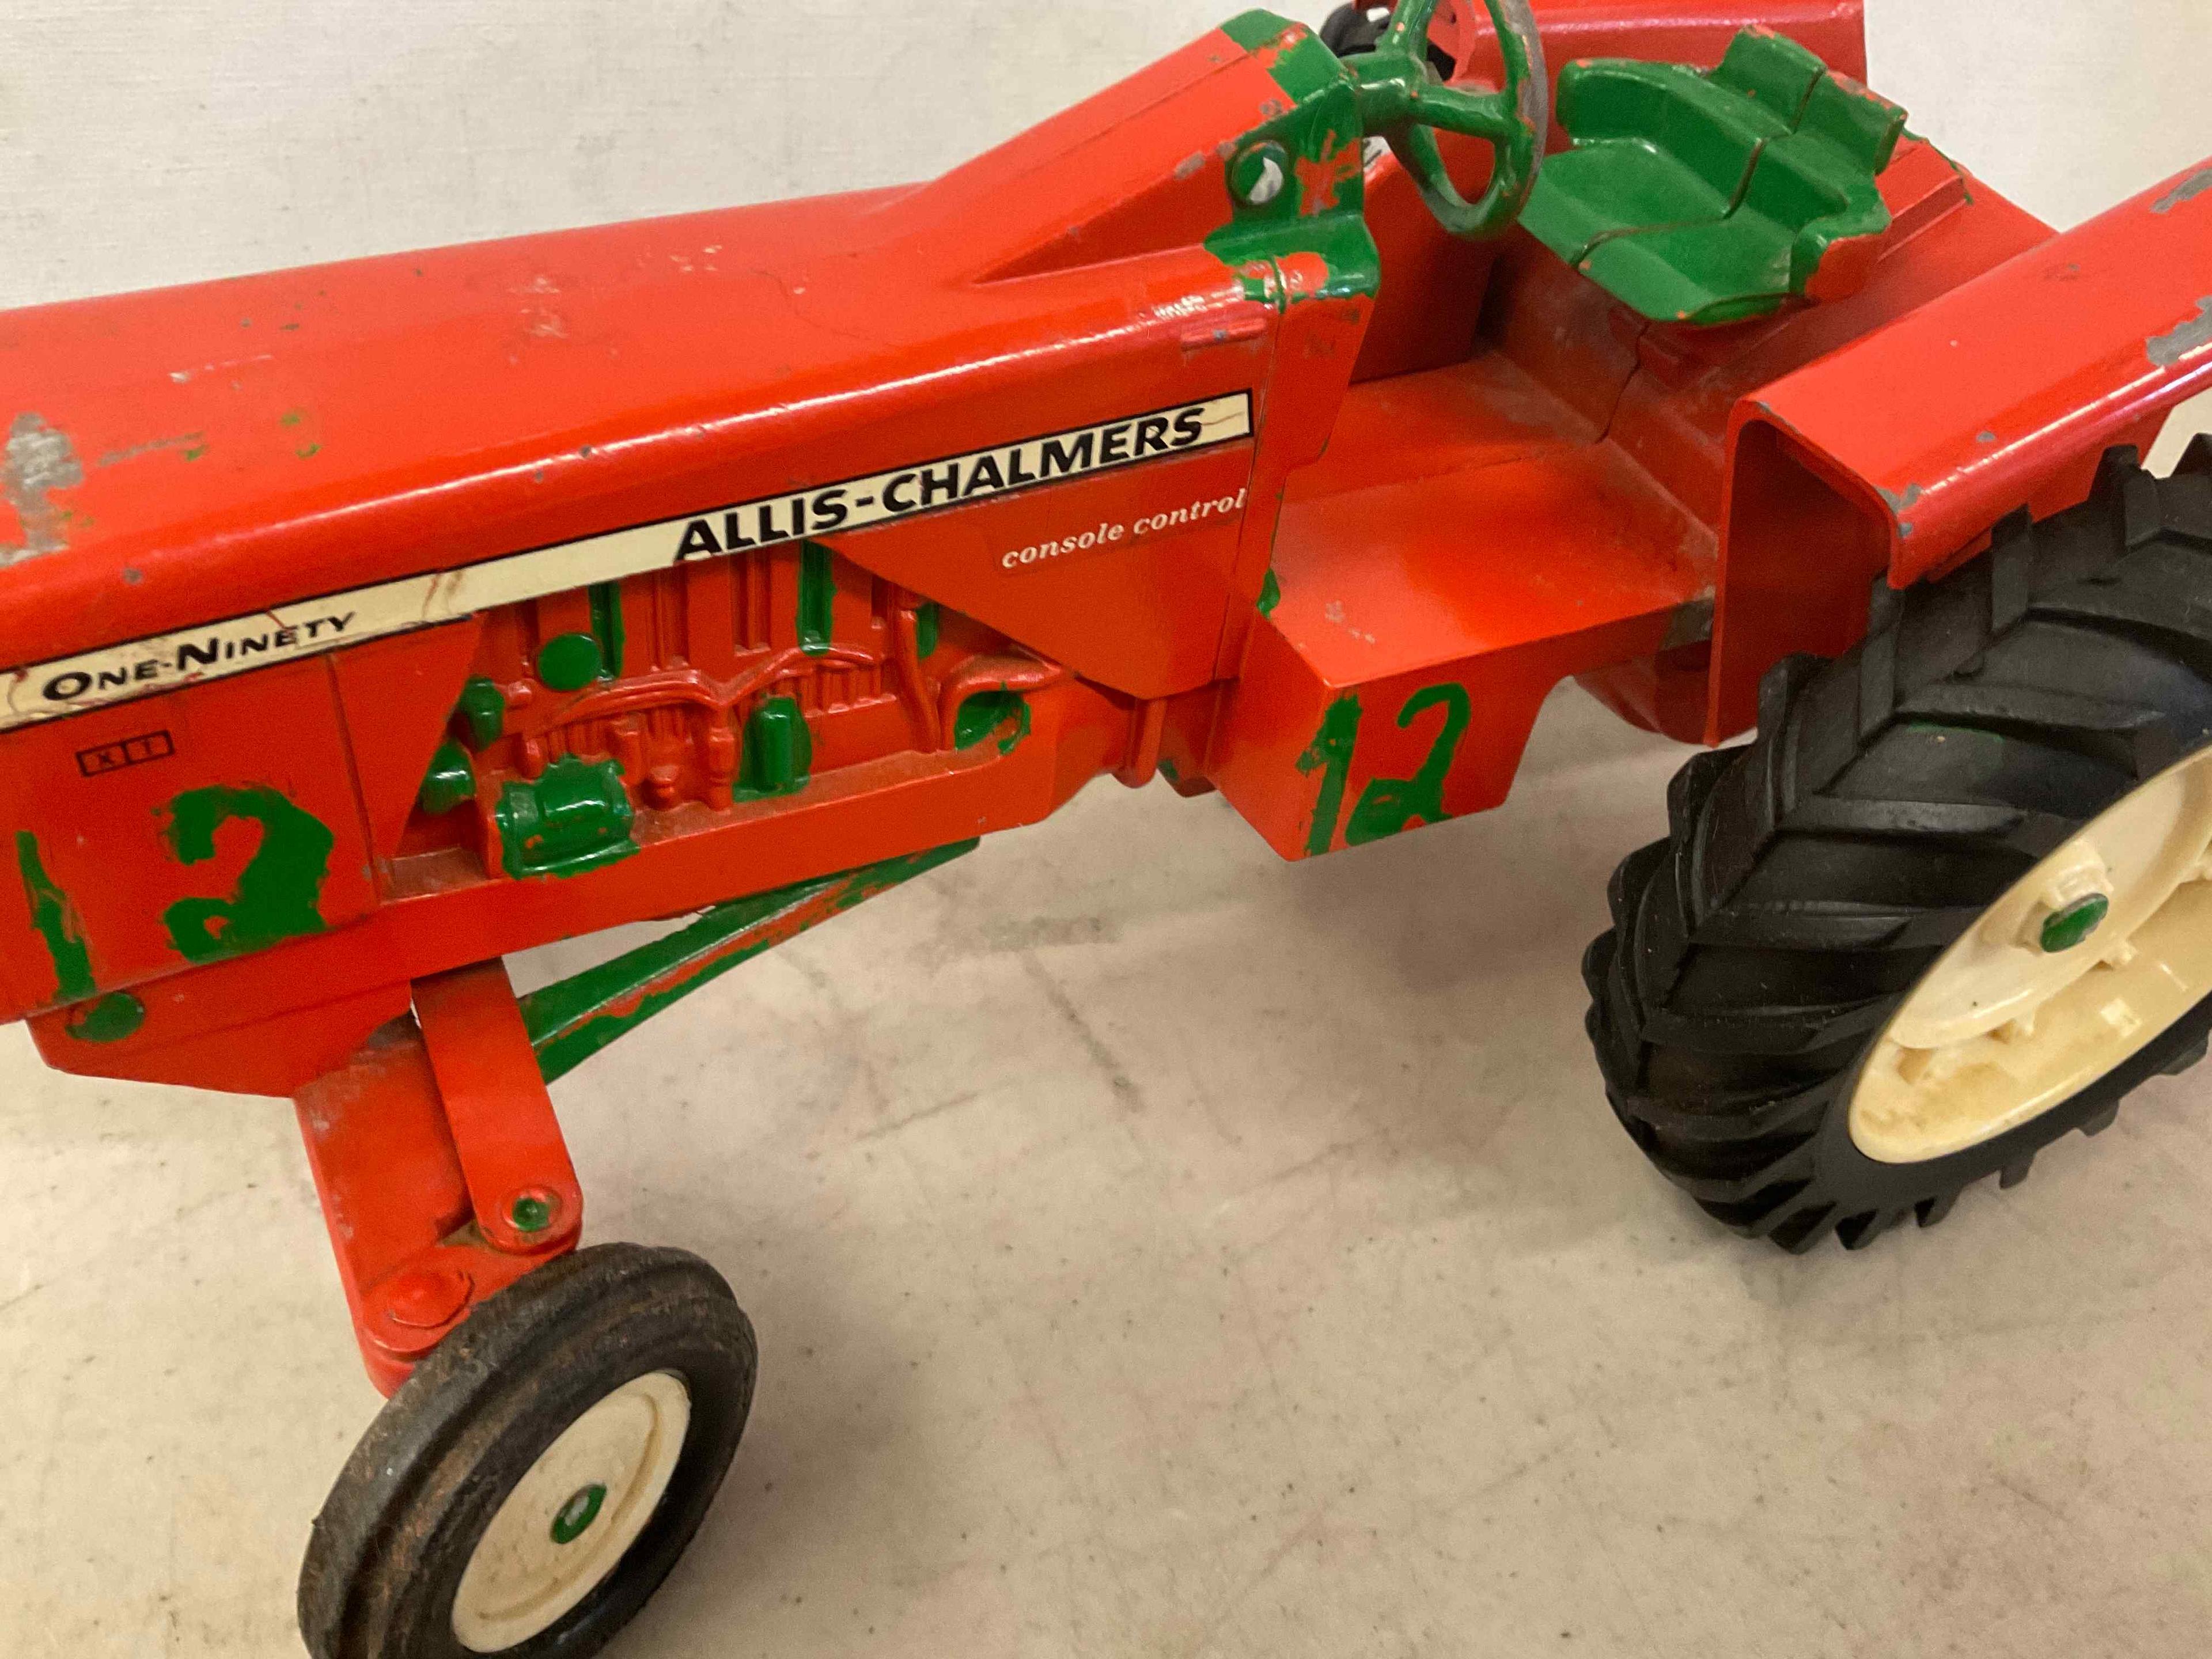 Allis Chalmers Toy Tractor, Toy Globe